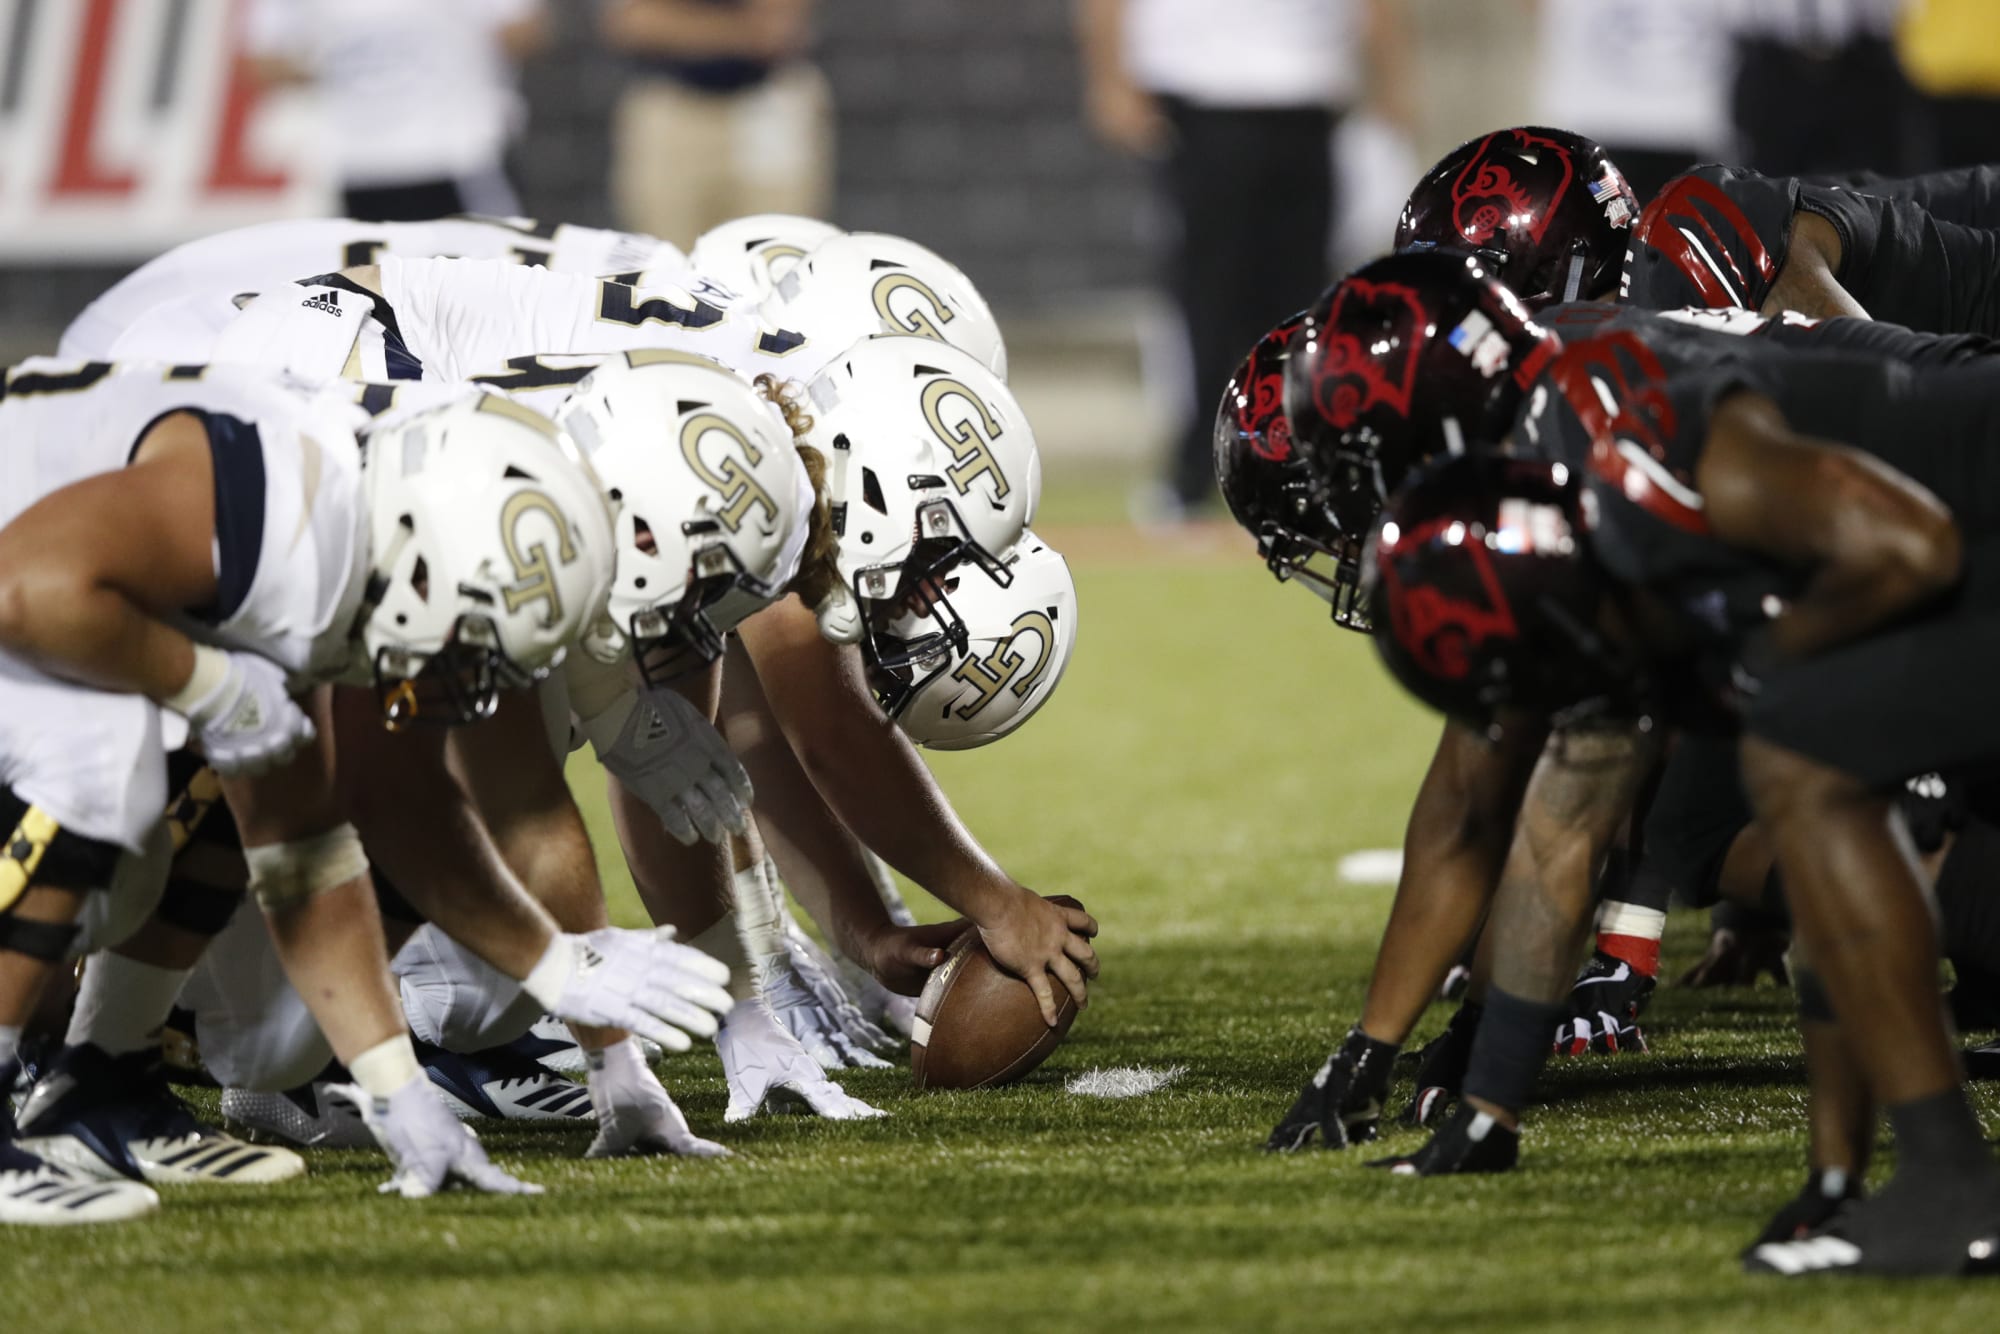 Louisville football: 5 most intriguing games of 2020 schedule - Page 2